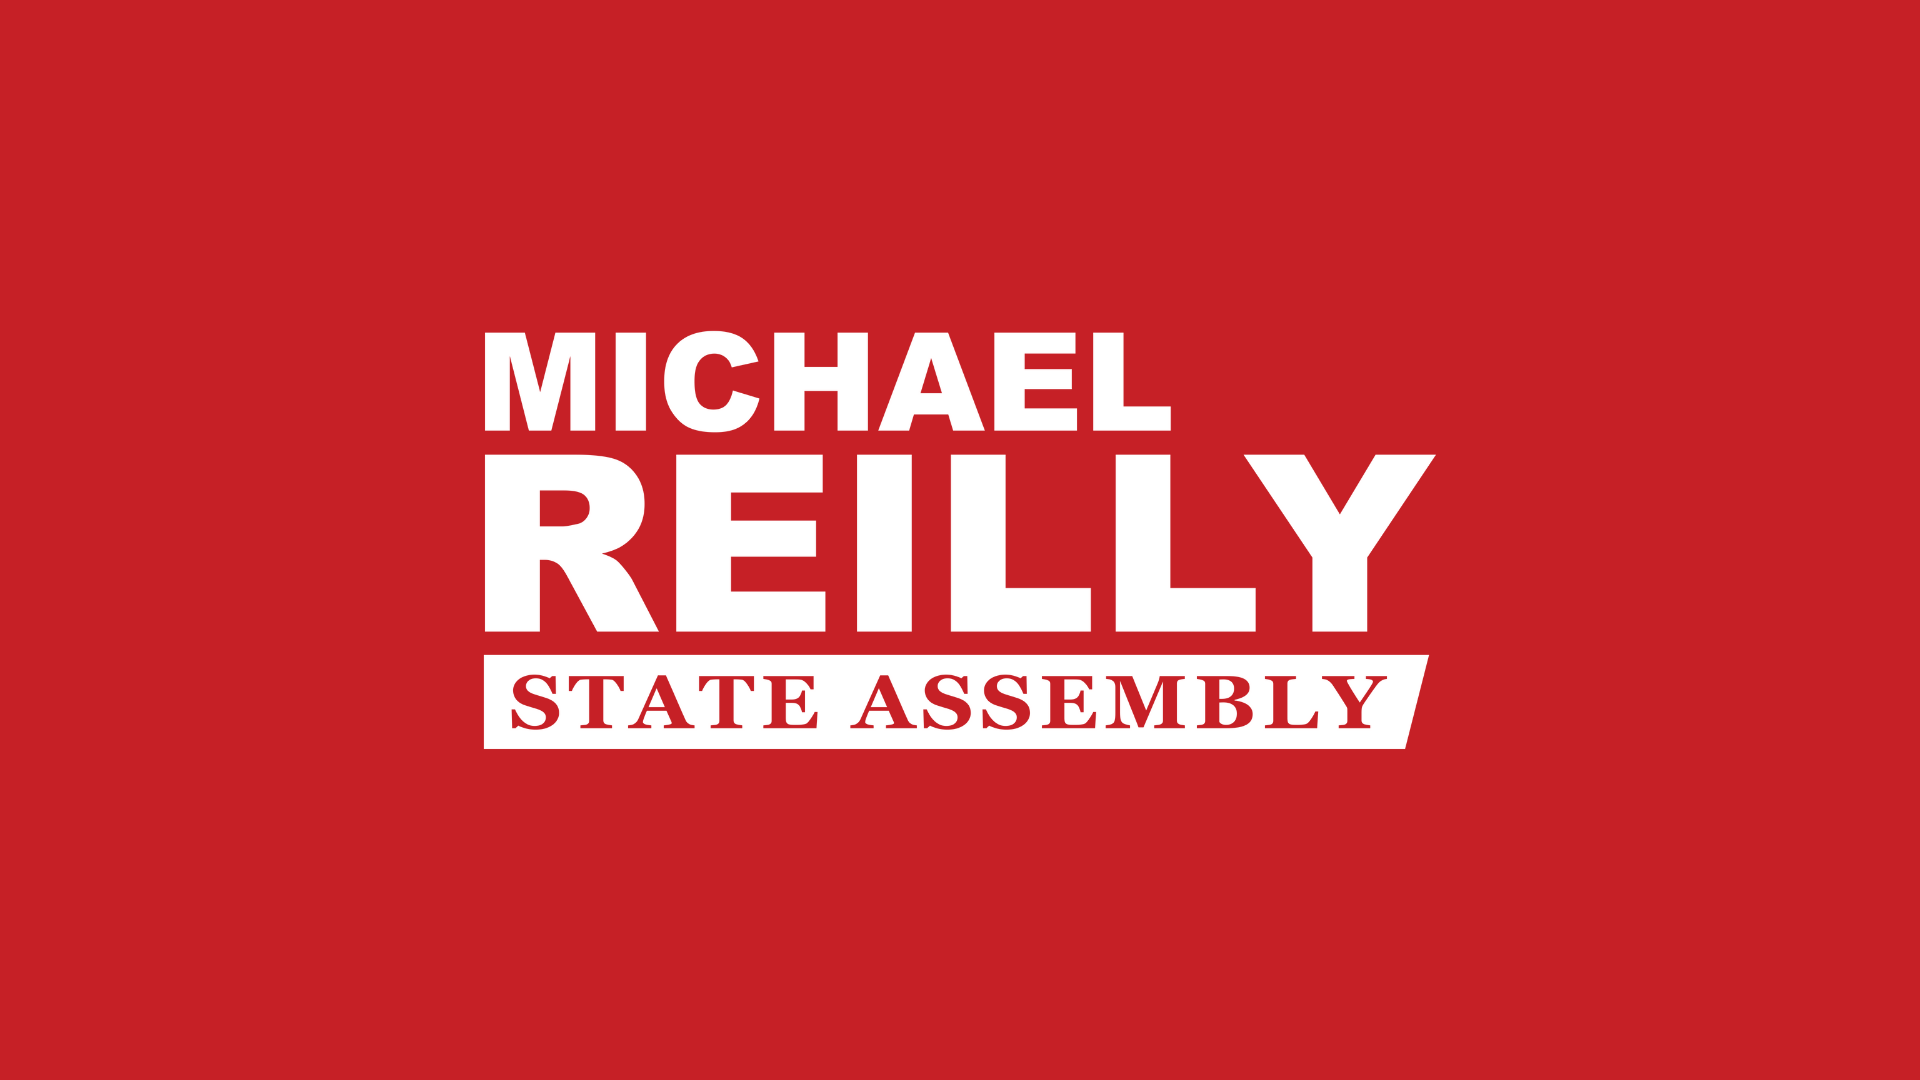 Statement from Assemblymember Reilly after having been briefed by NYC ...